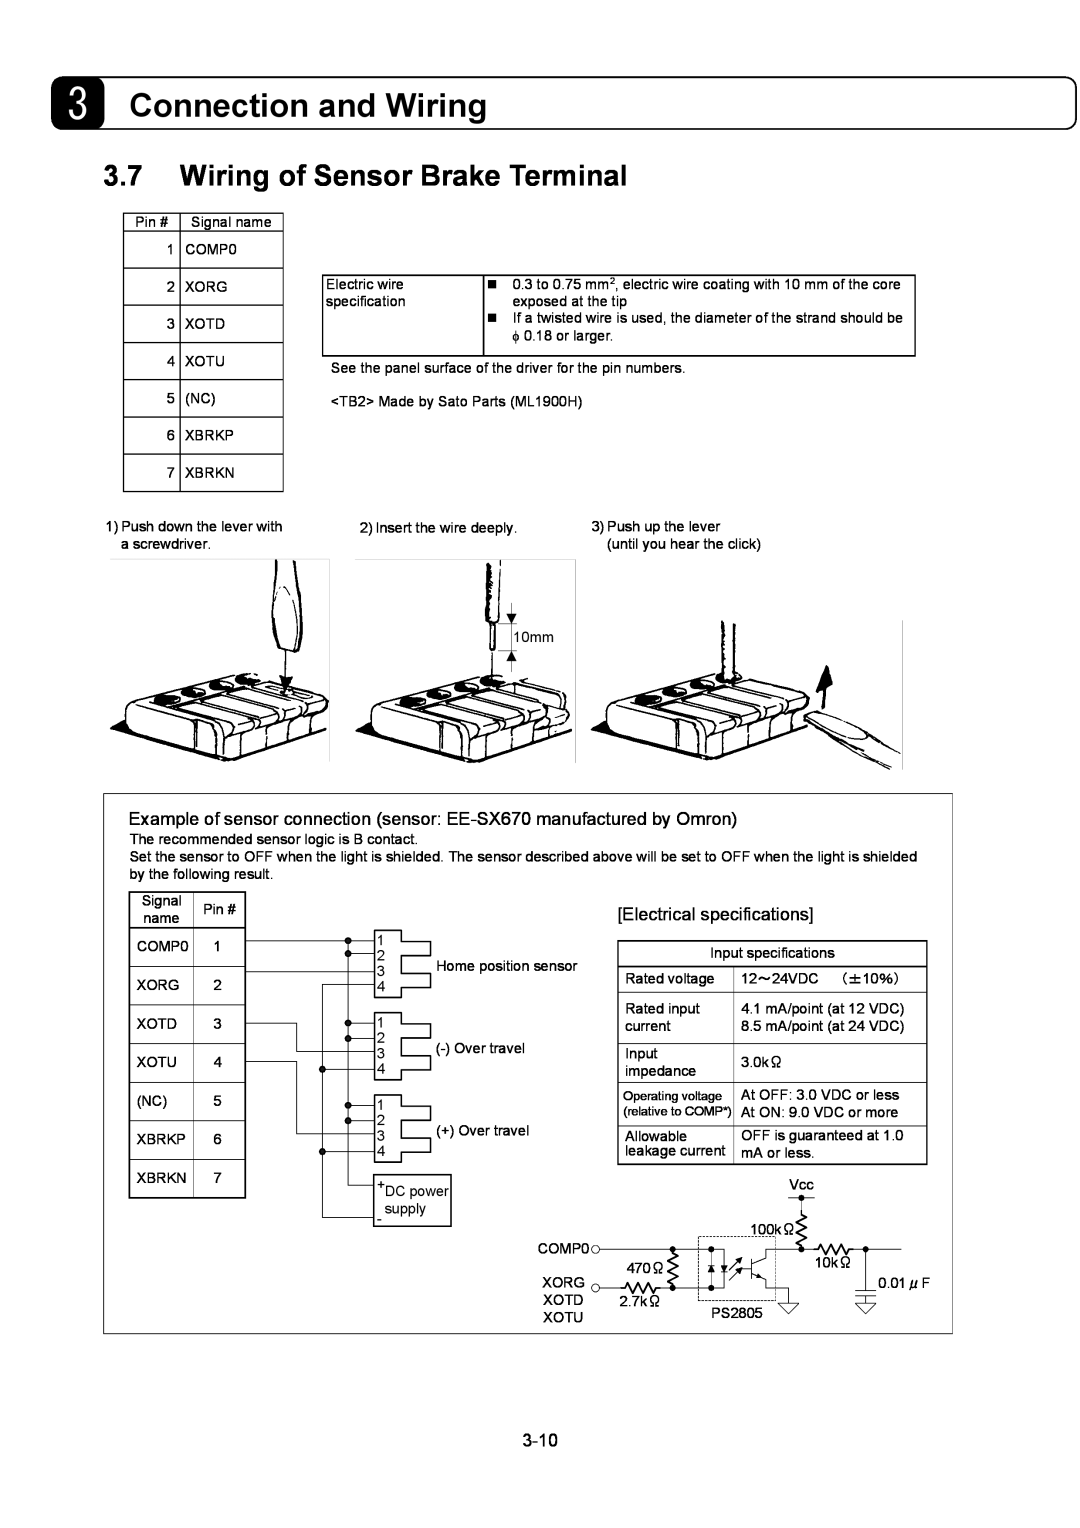 Parker Hannifin G2 manual Wiring of Sensor Brake Terminal, Connection and Wiring, Electrical specifications, 3-10 